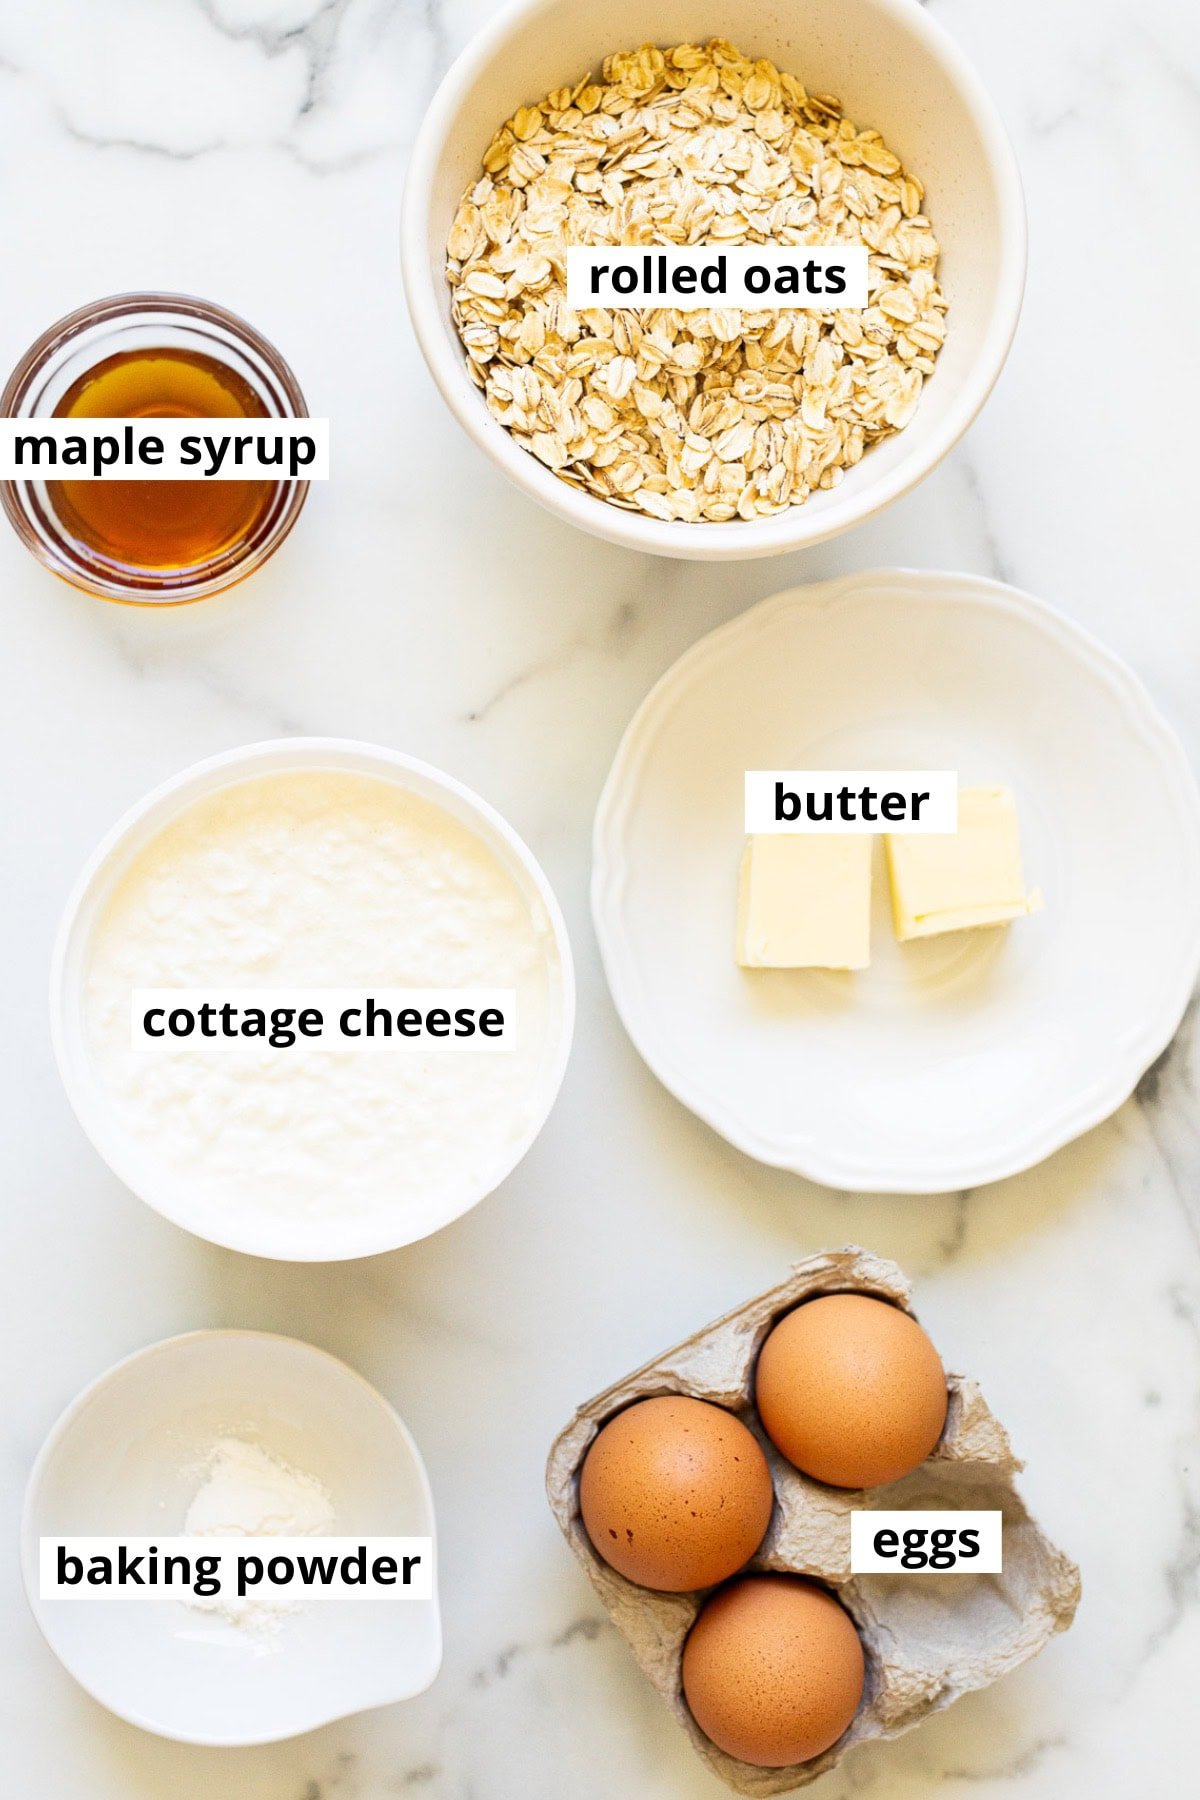 Rolled oats, maple syrup, butter, cottage cheese, eggs, baking powder.